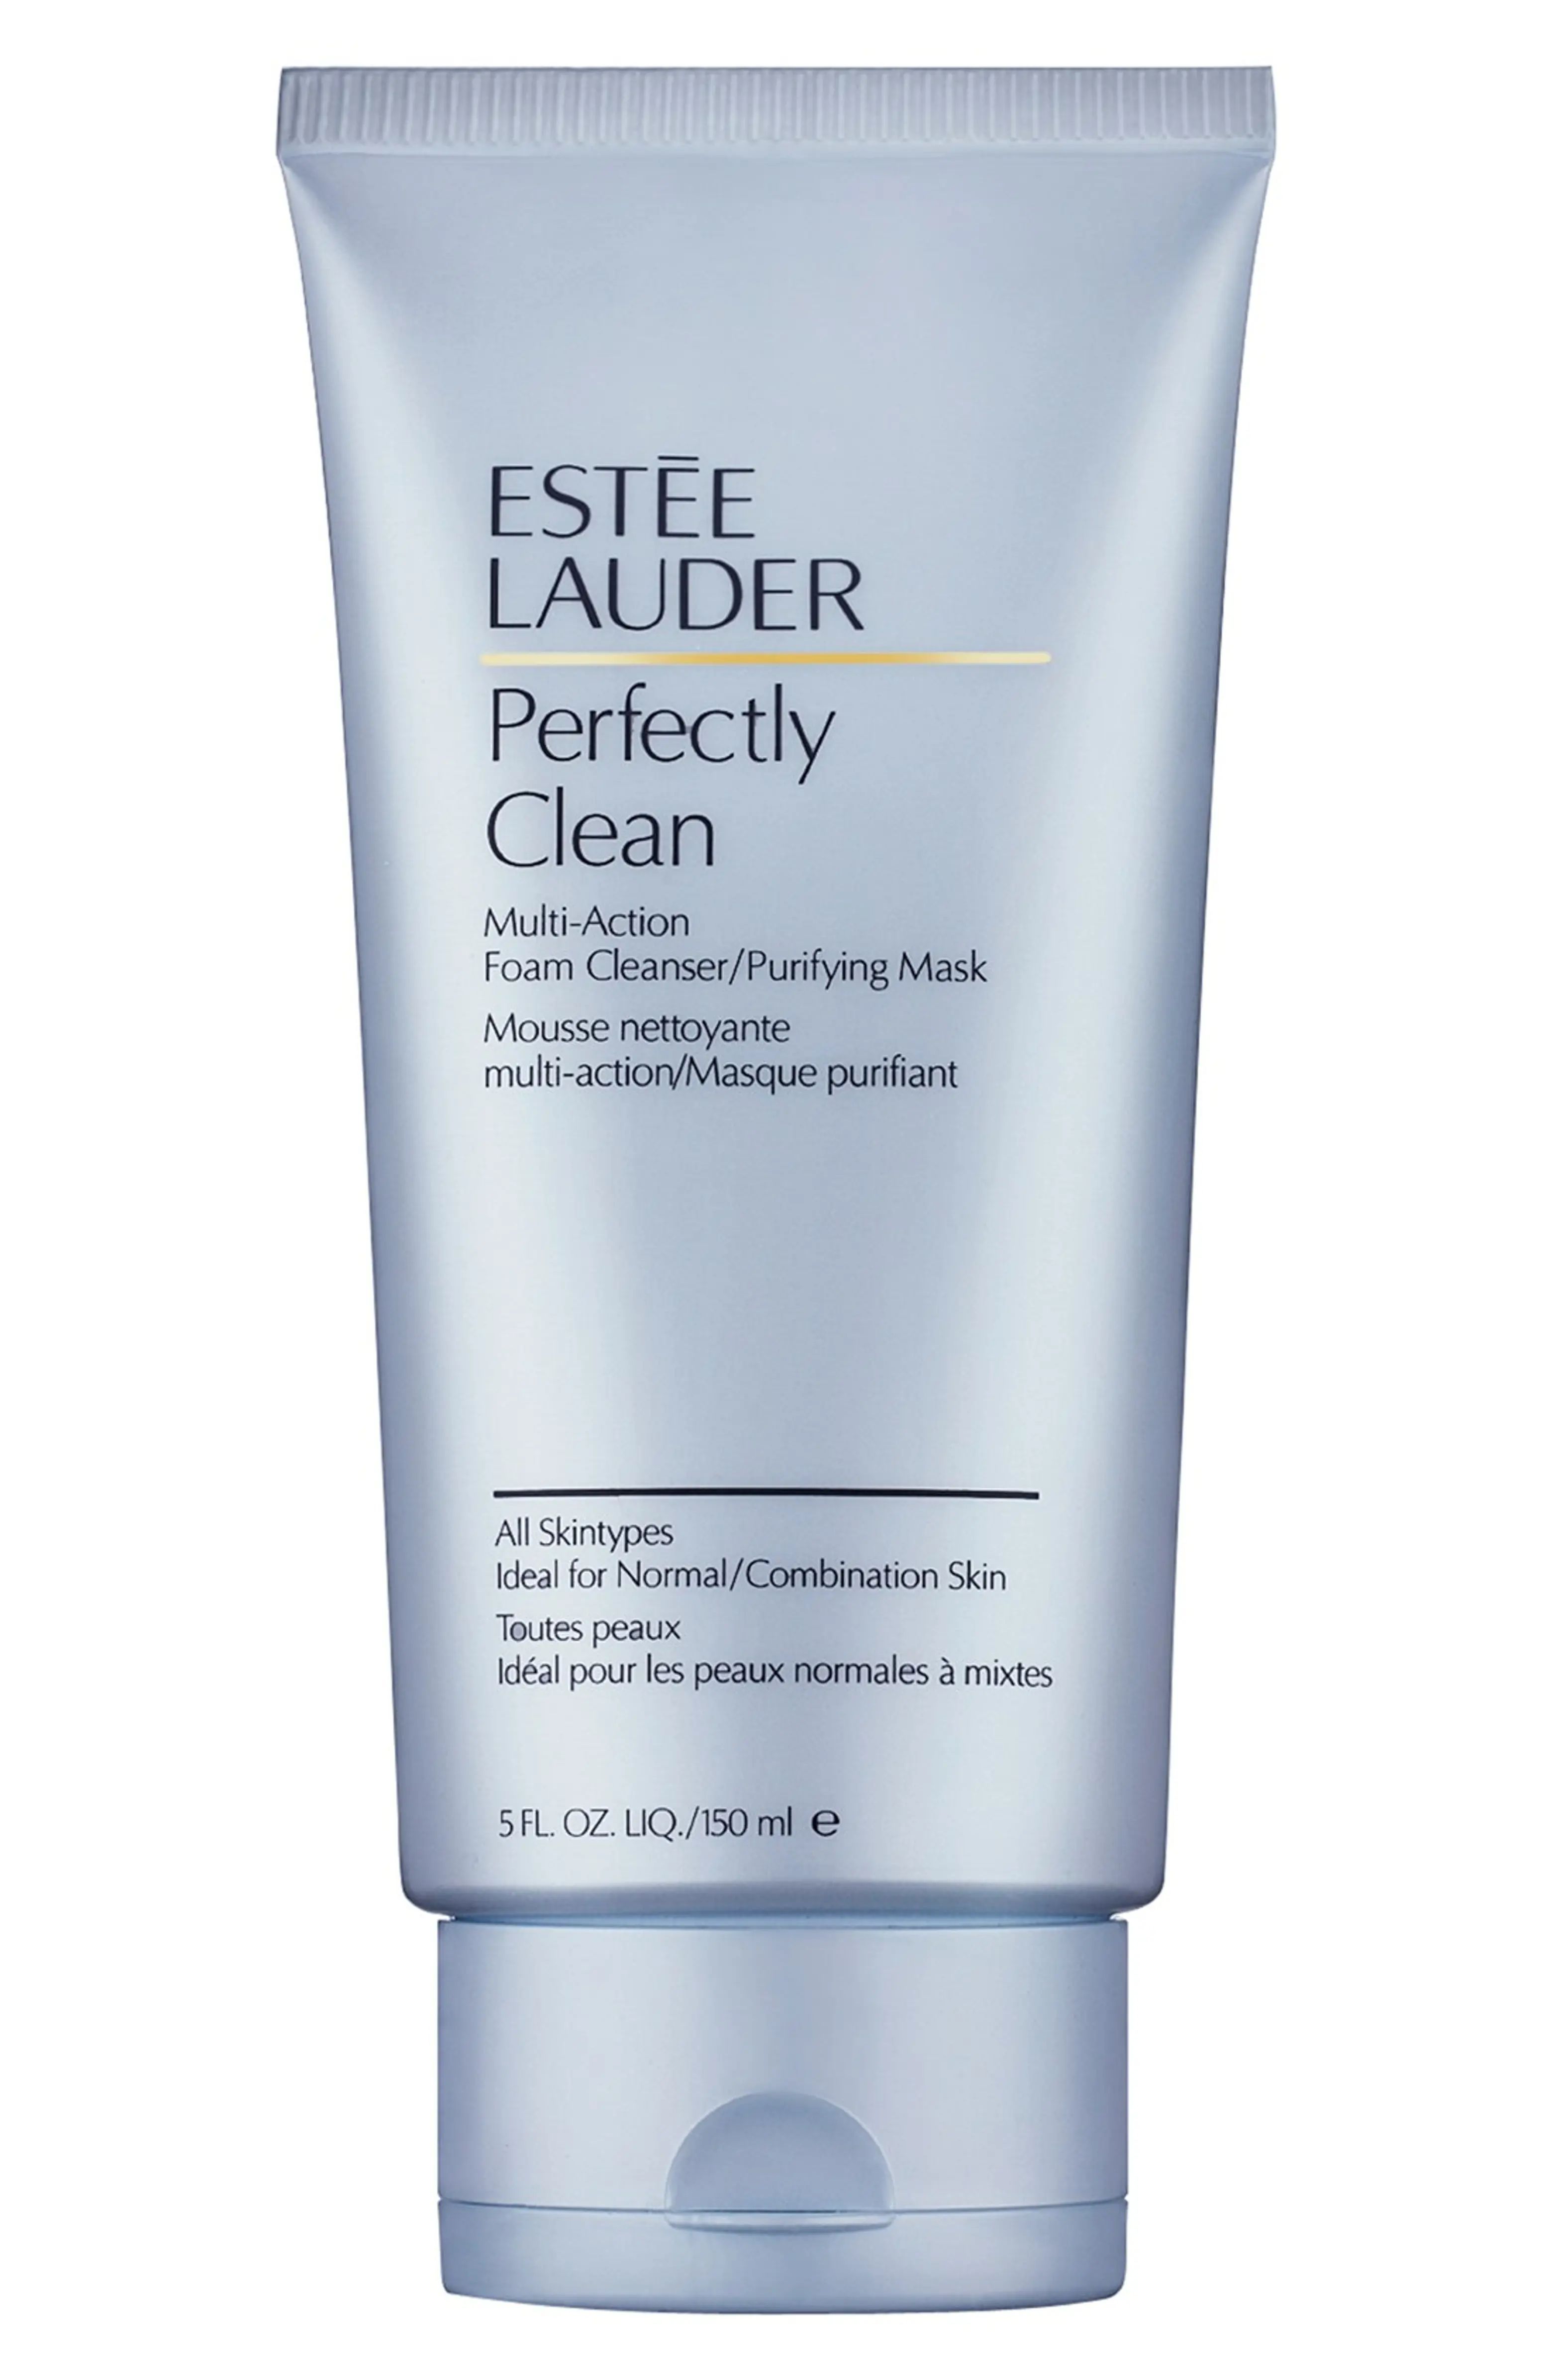 Perfectly Clean Multi-Action Foam Cleanser/Purifying Mask | Nordstrom